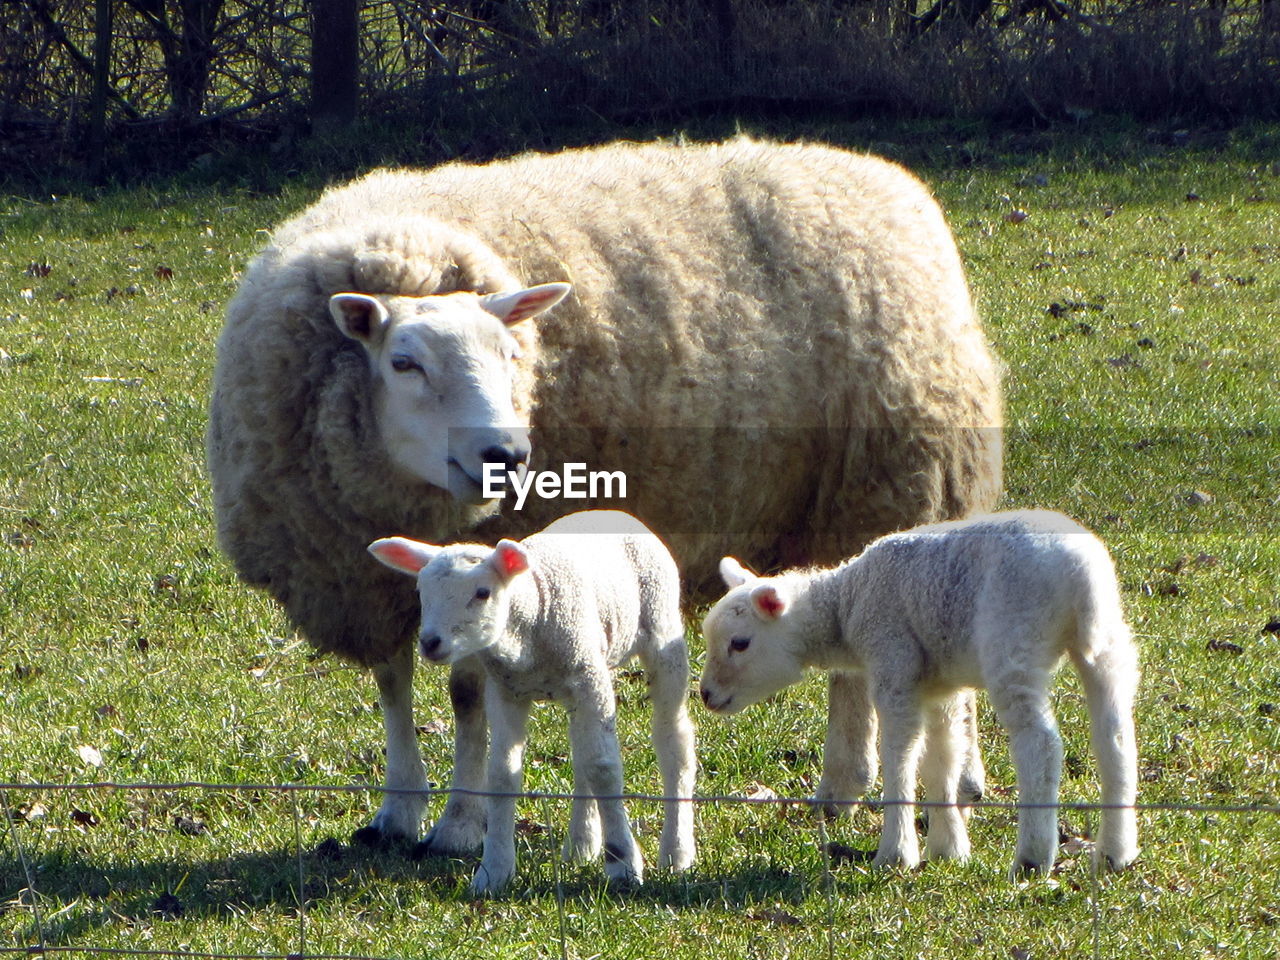 Sheep with lambs on grassy field